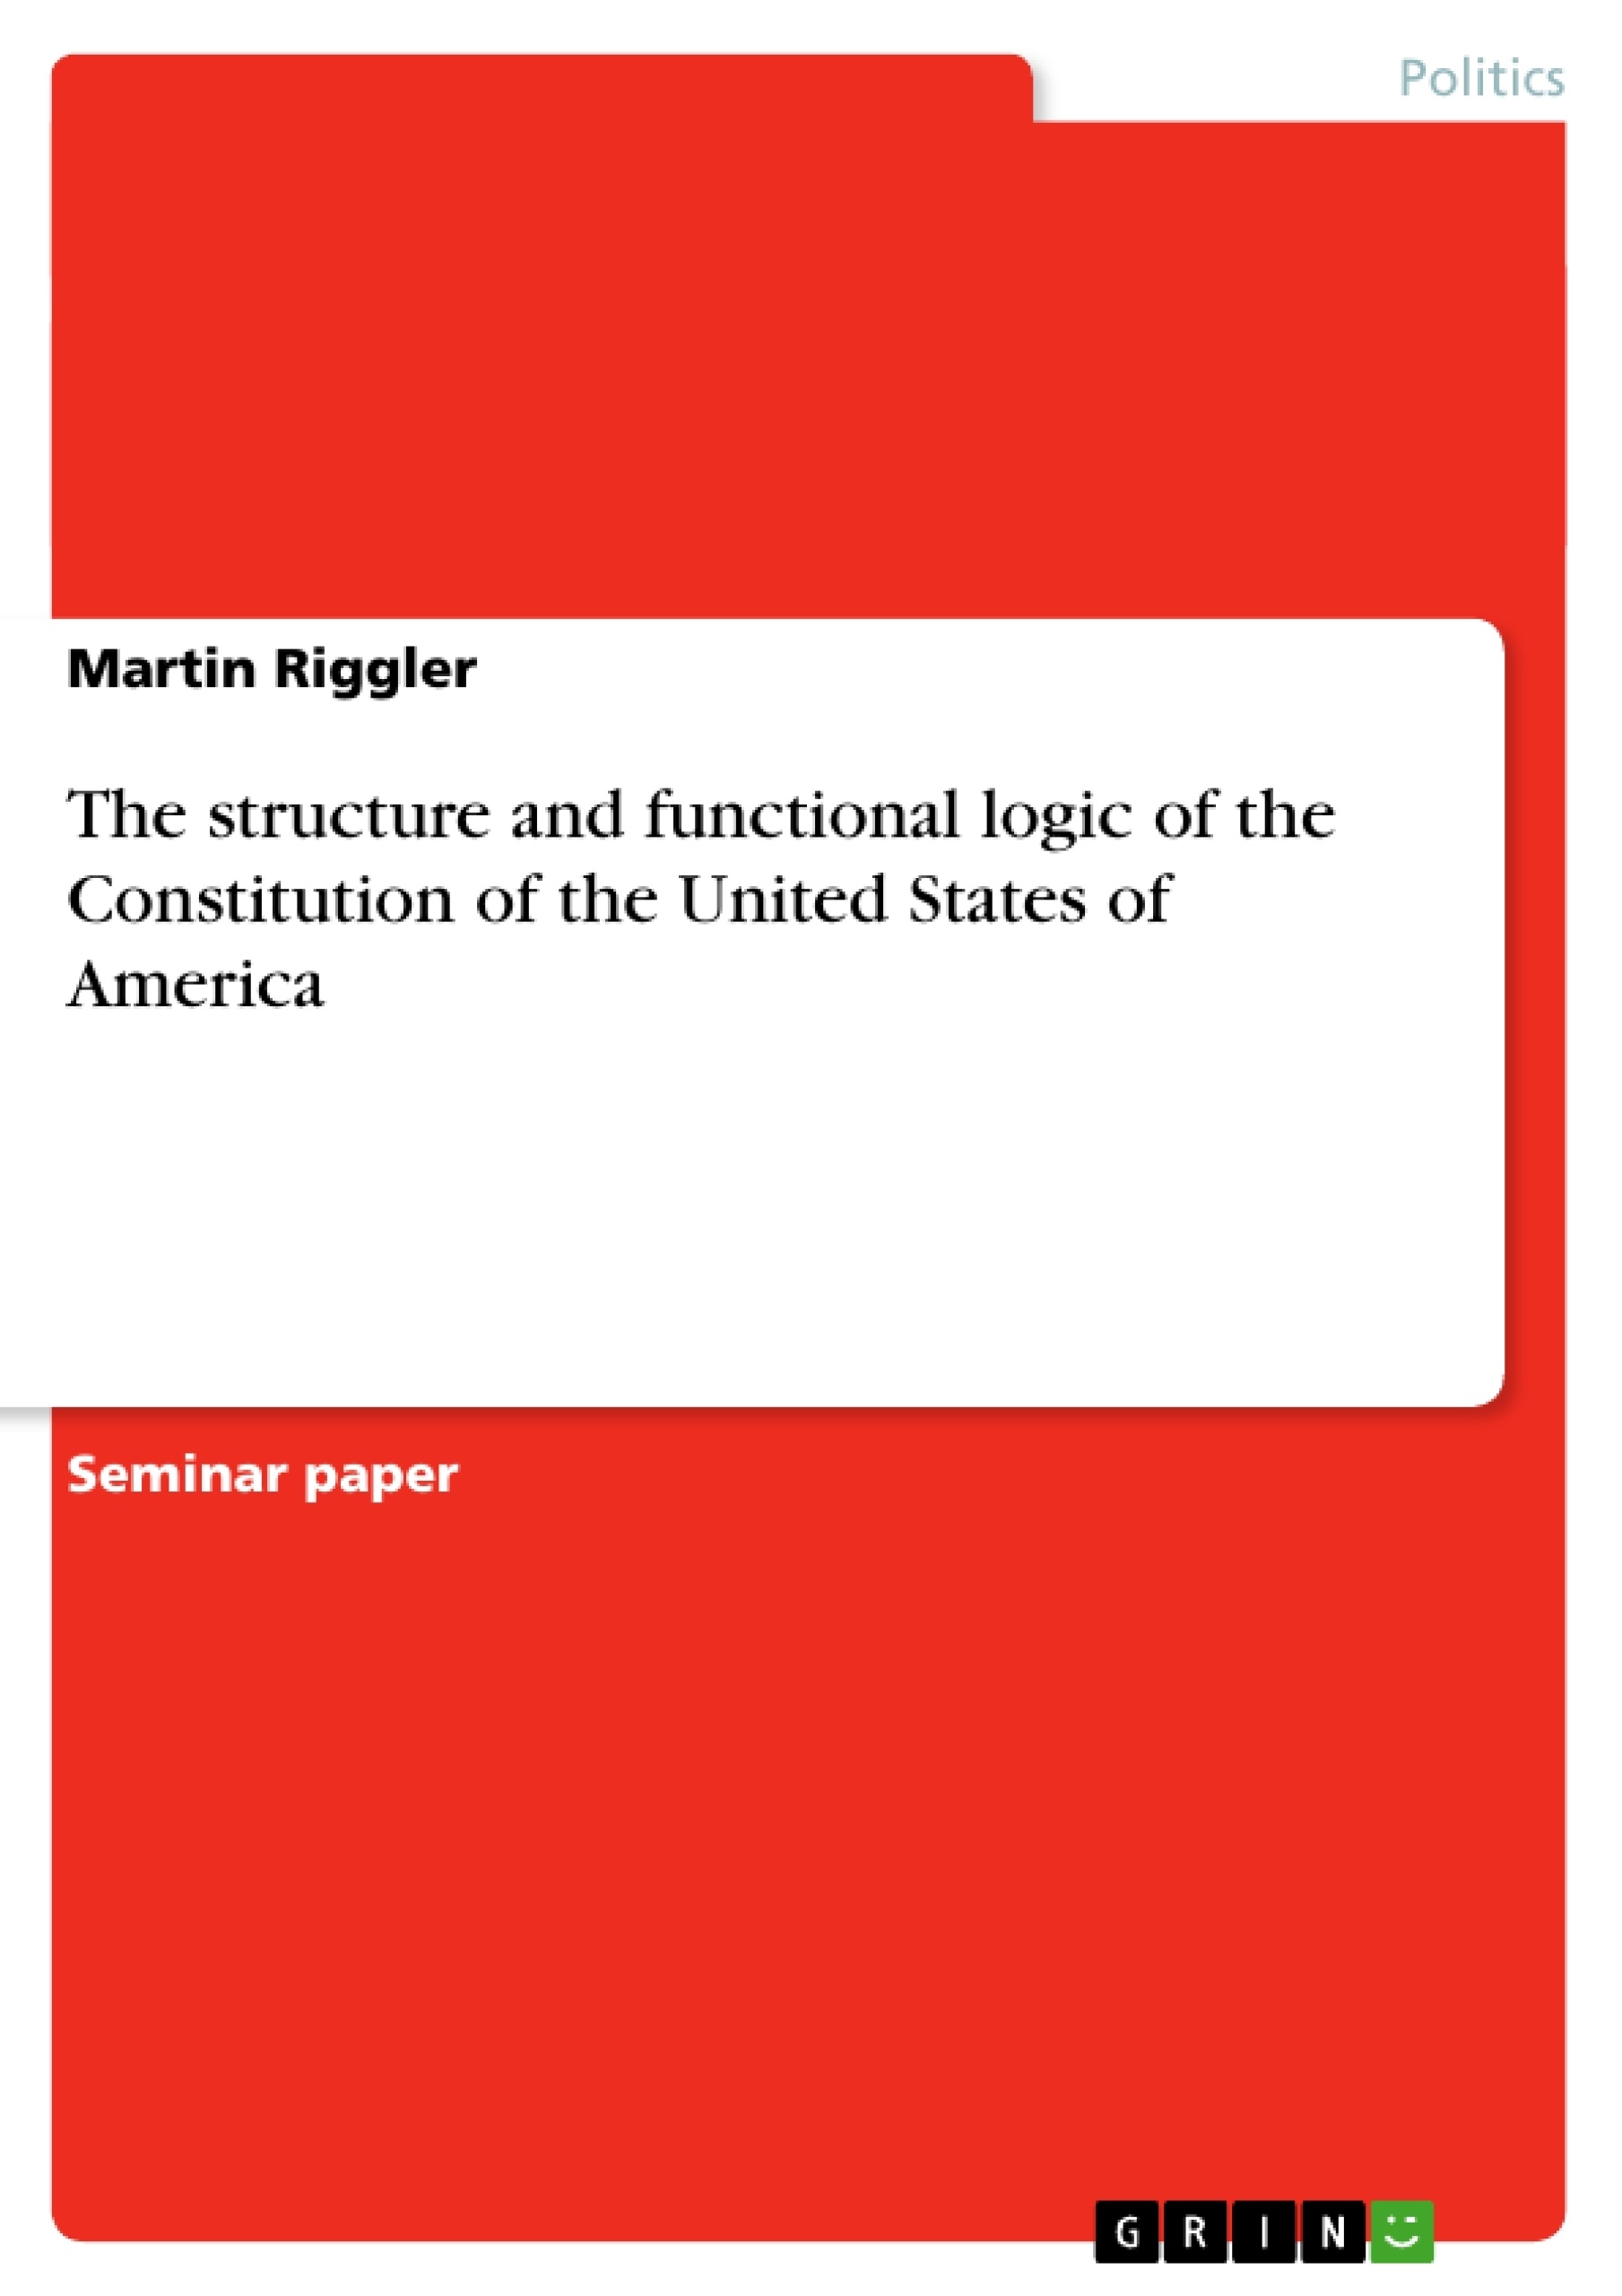 Título: The structure and functional logic of the Constitution of the United States of America